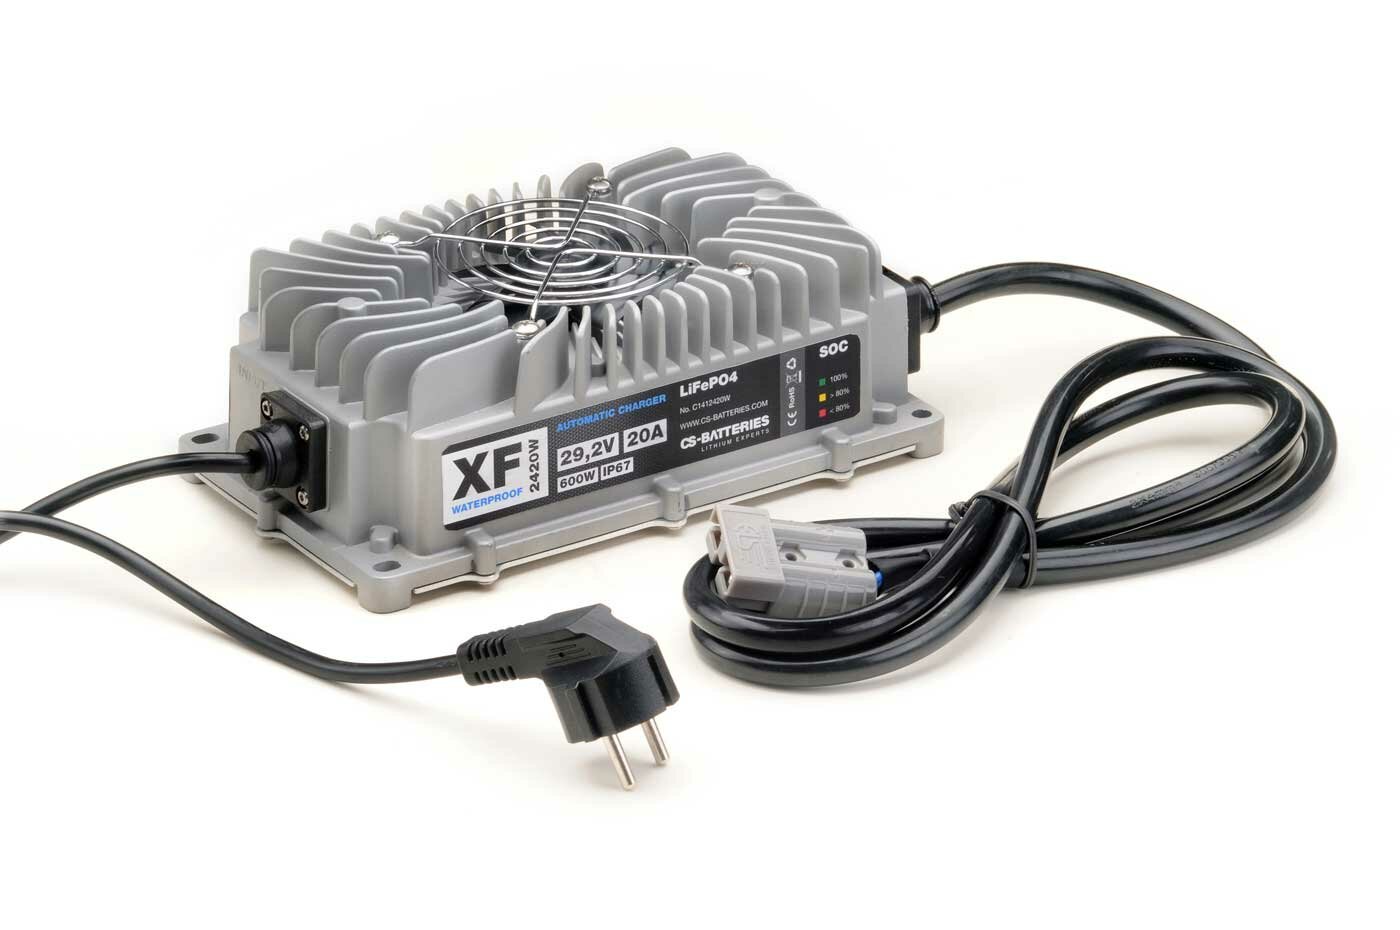 CS-Electronic XF2420W automatic Waterproof LIFEPO4 24V/20A charger in the metal housing -600W waterproof IP67